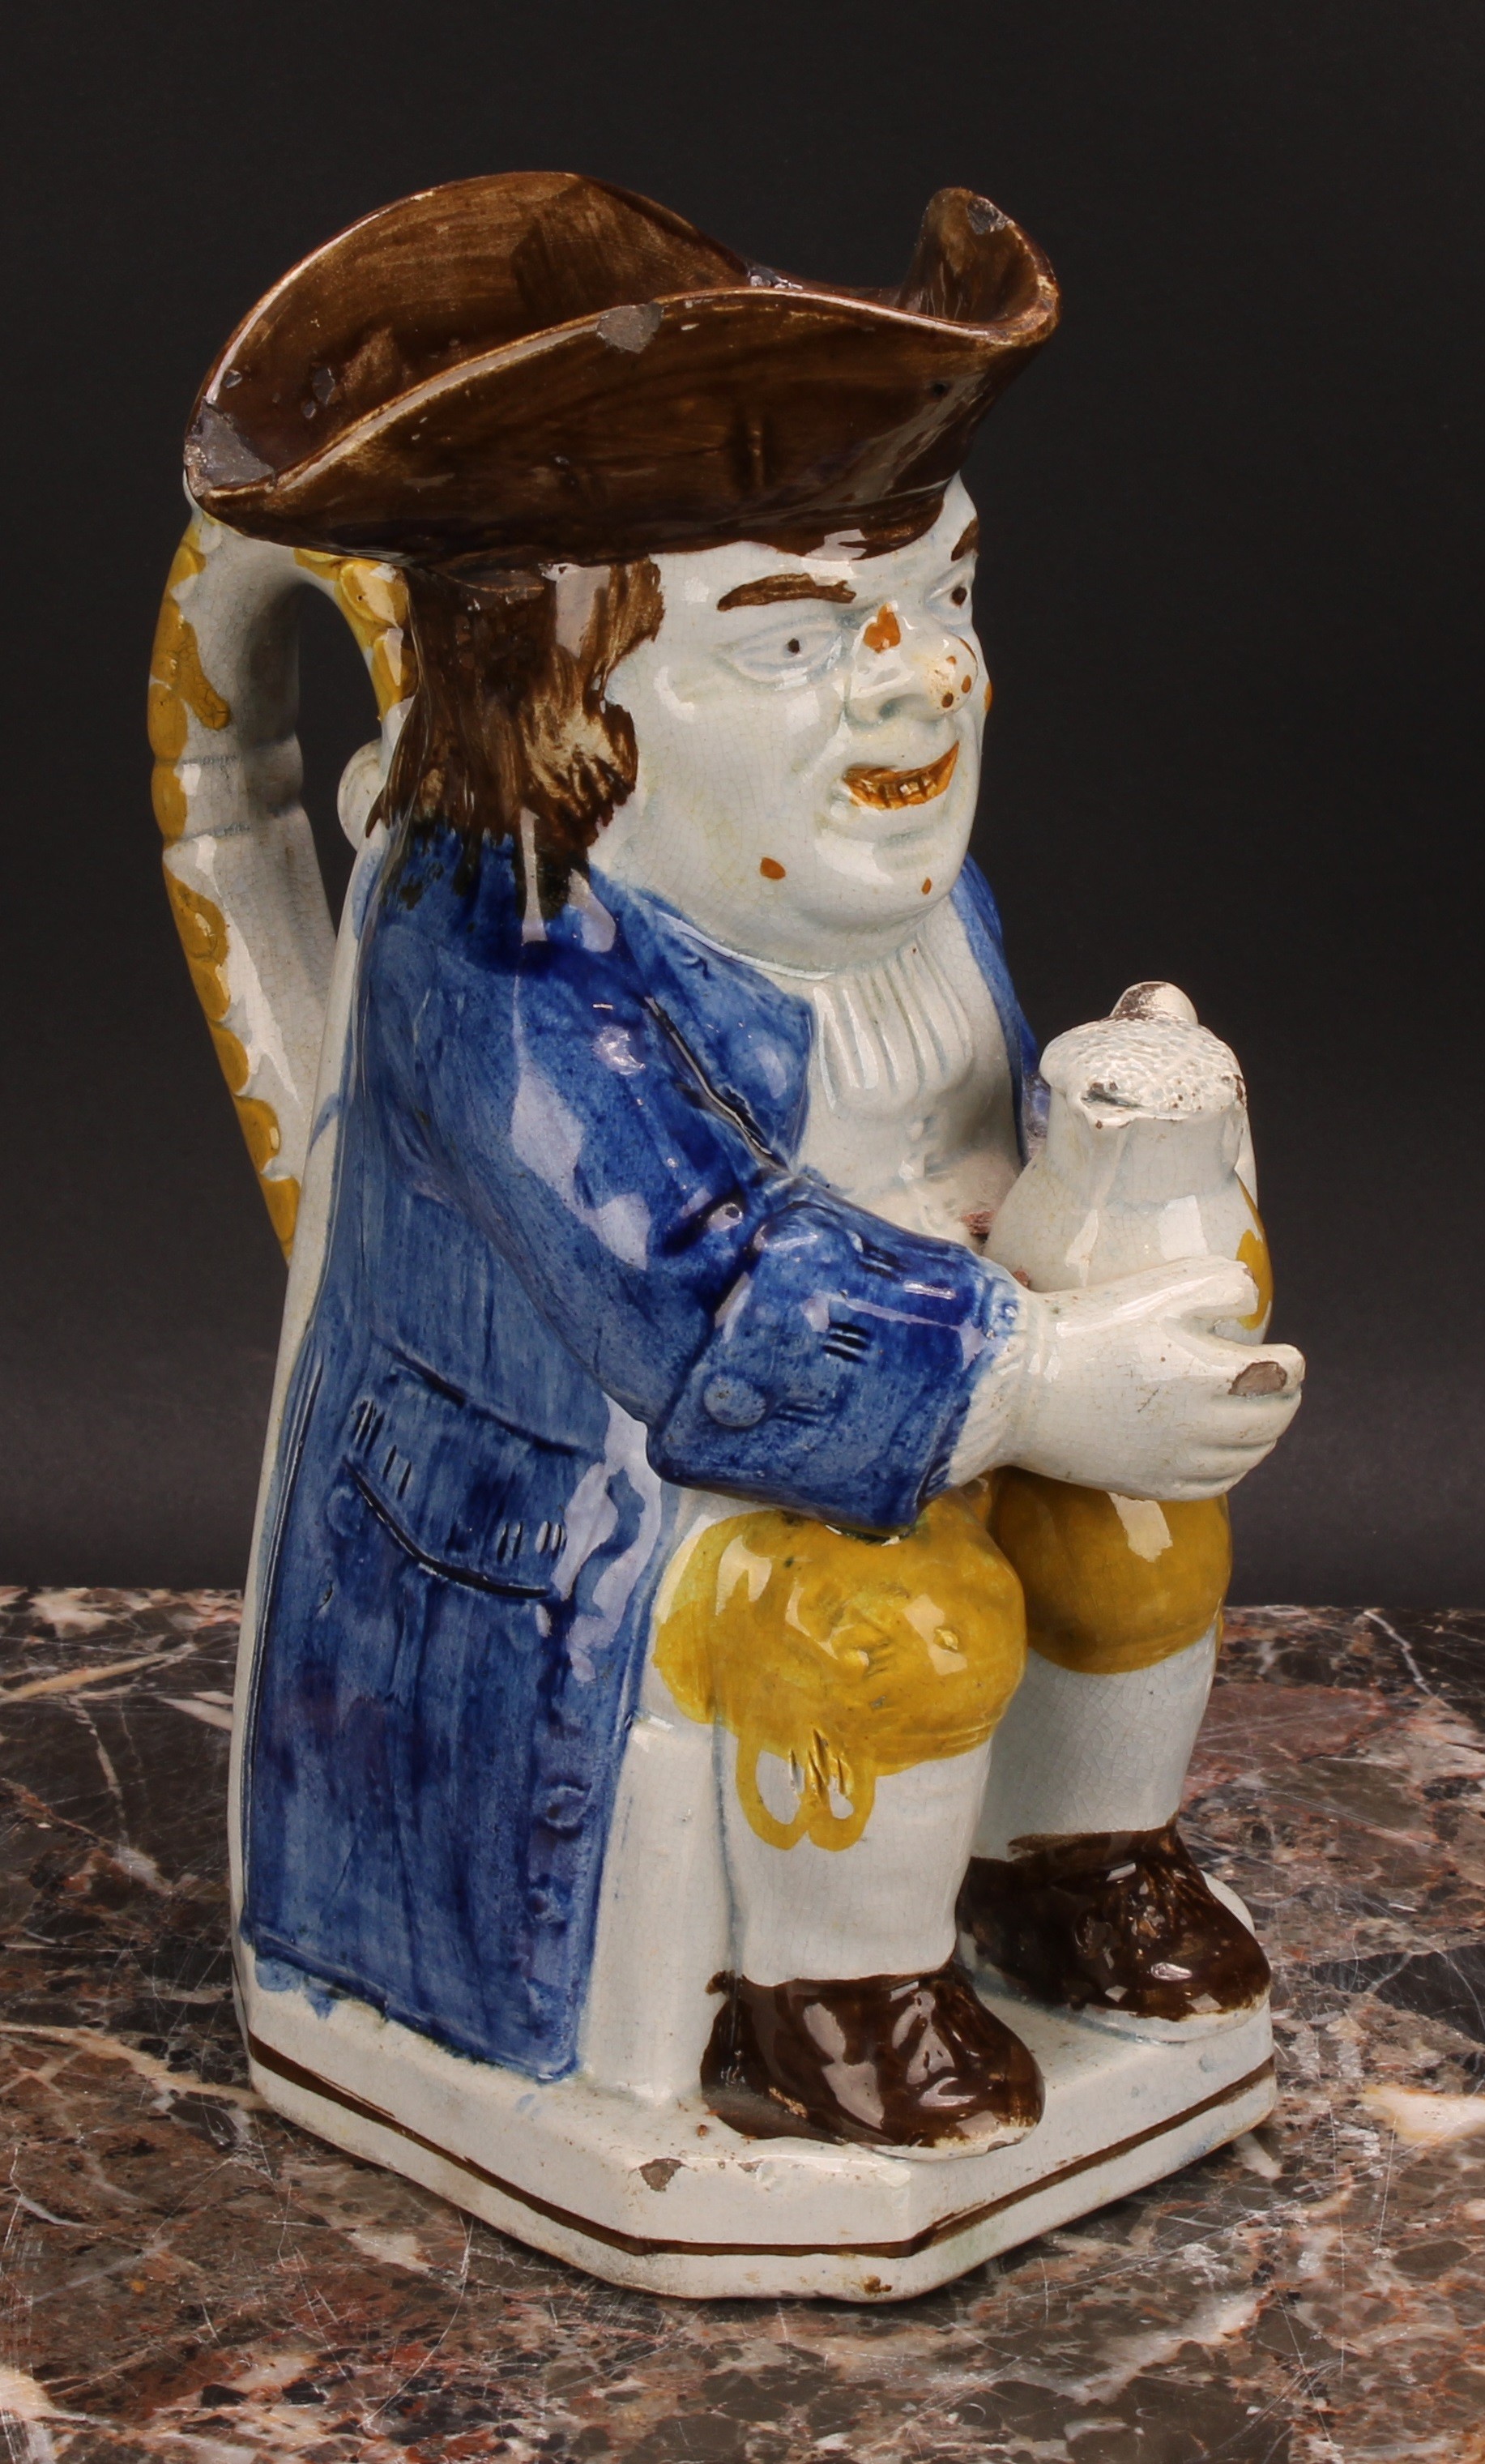 An early 19th century Prattware Toby jug, seated holding a jug of foaming ale, painted in polychrome - Image 2 of 5